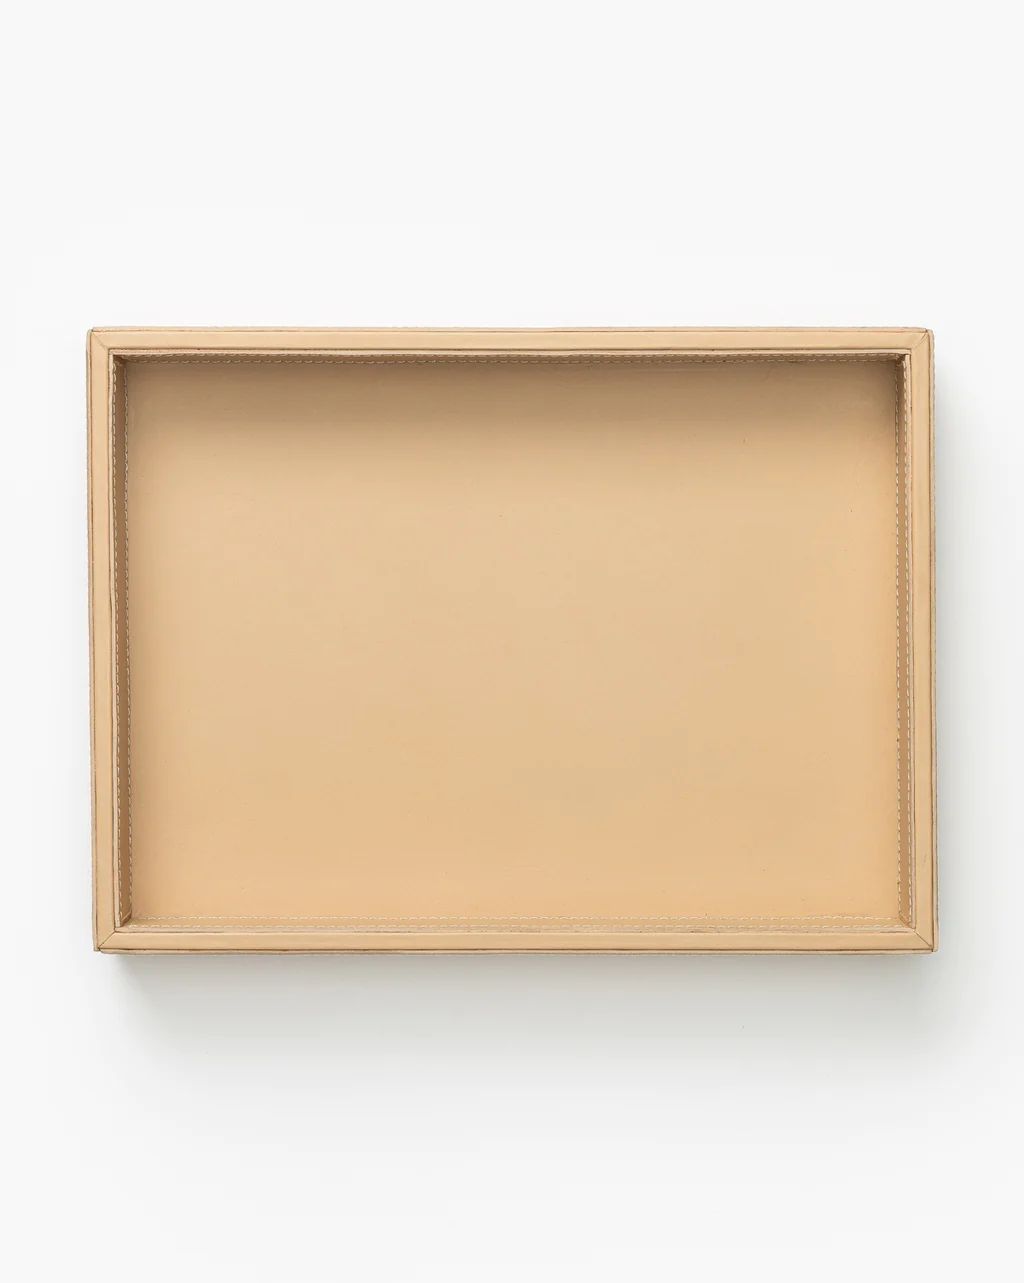 Rupert Leather Letter Tray | McGee & Co.